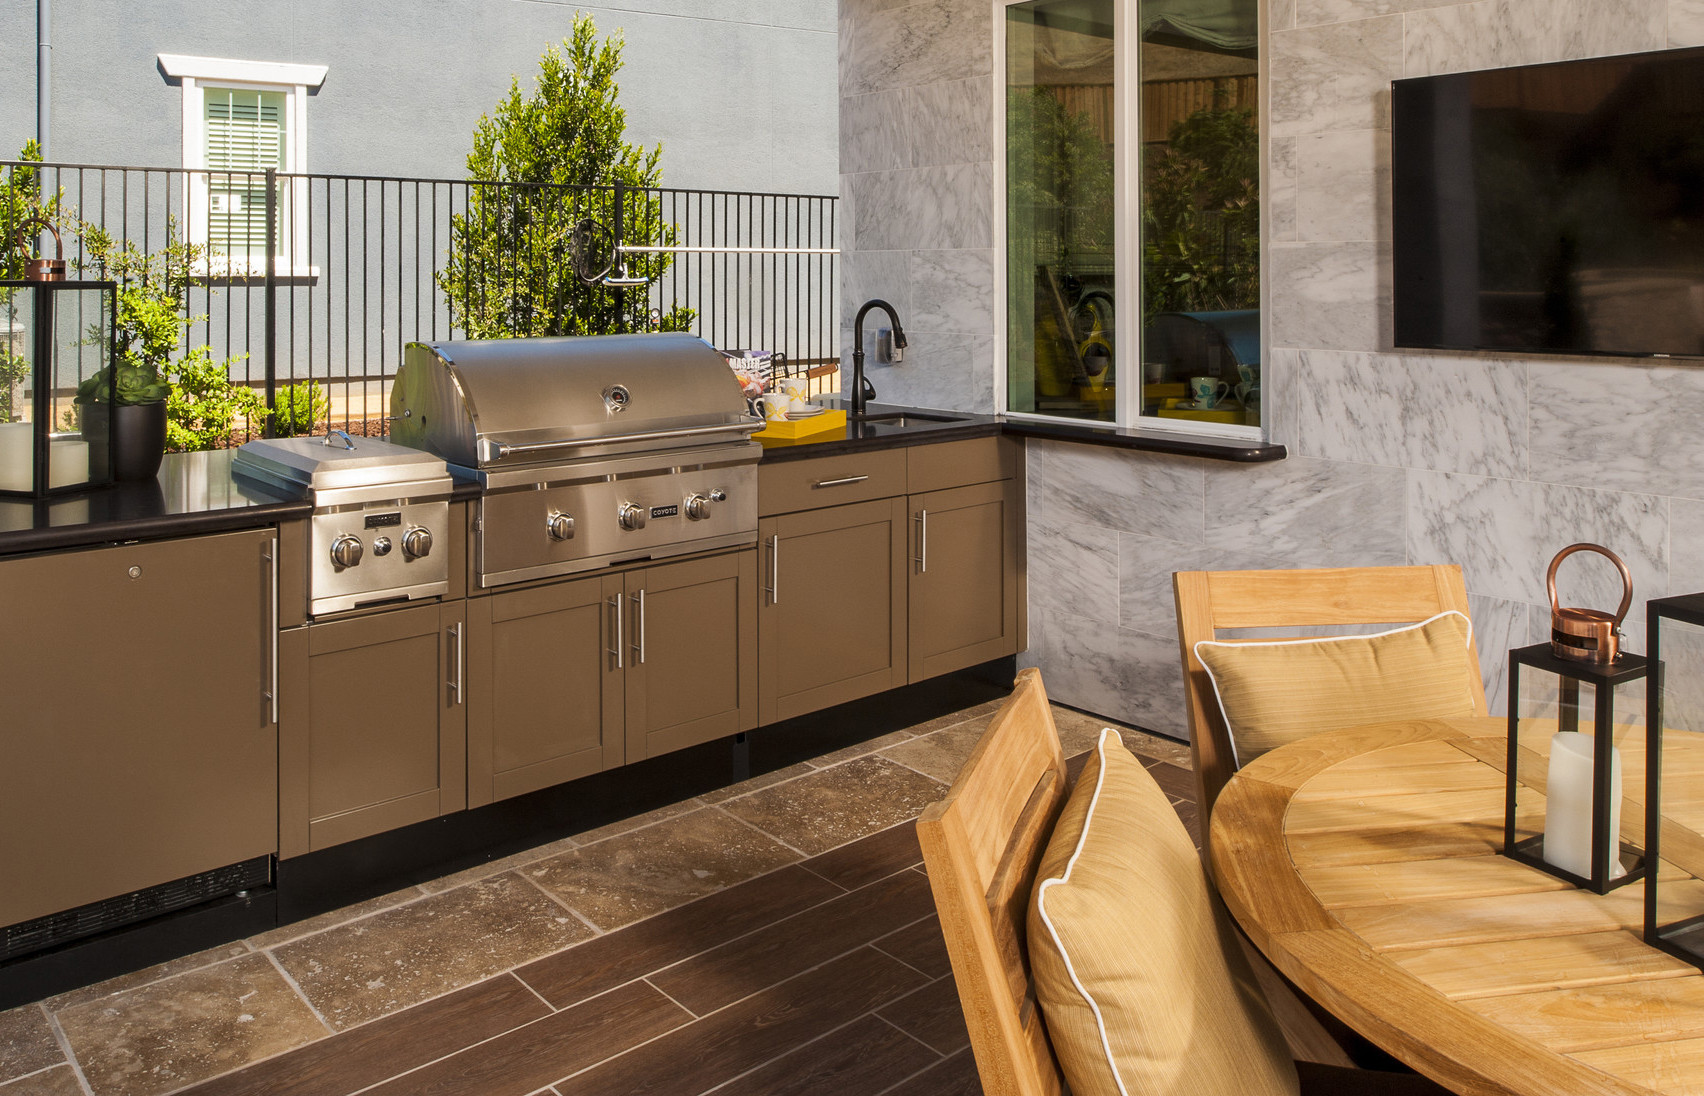 Danver Outdoor Kitchen
 Stainless Steel Base Cabinets for Outdoor Kitchens